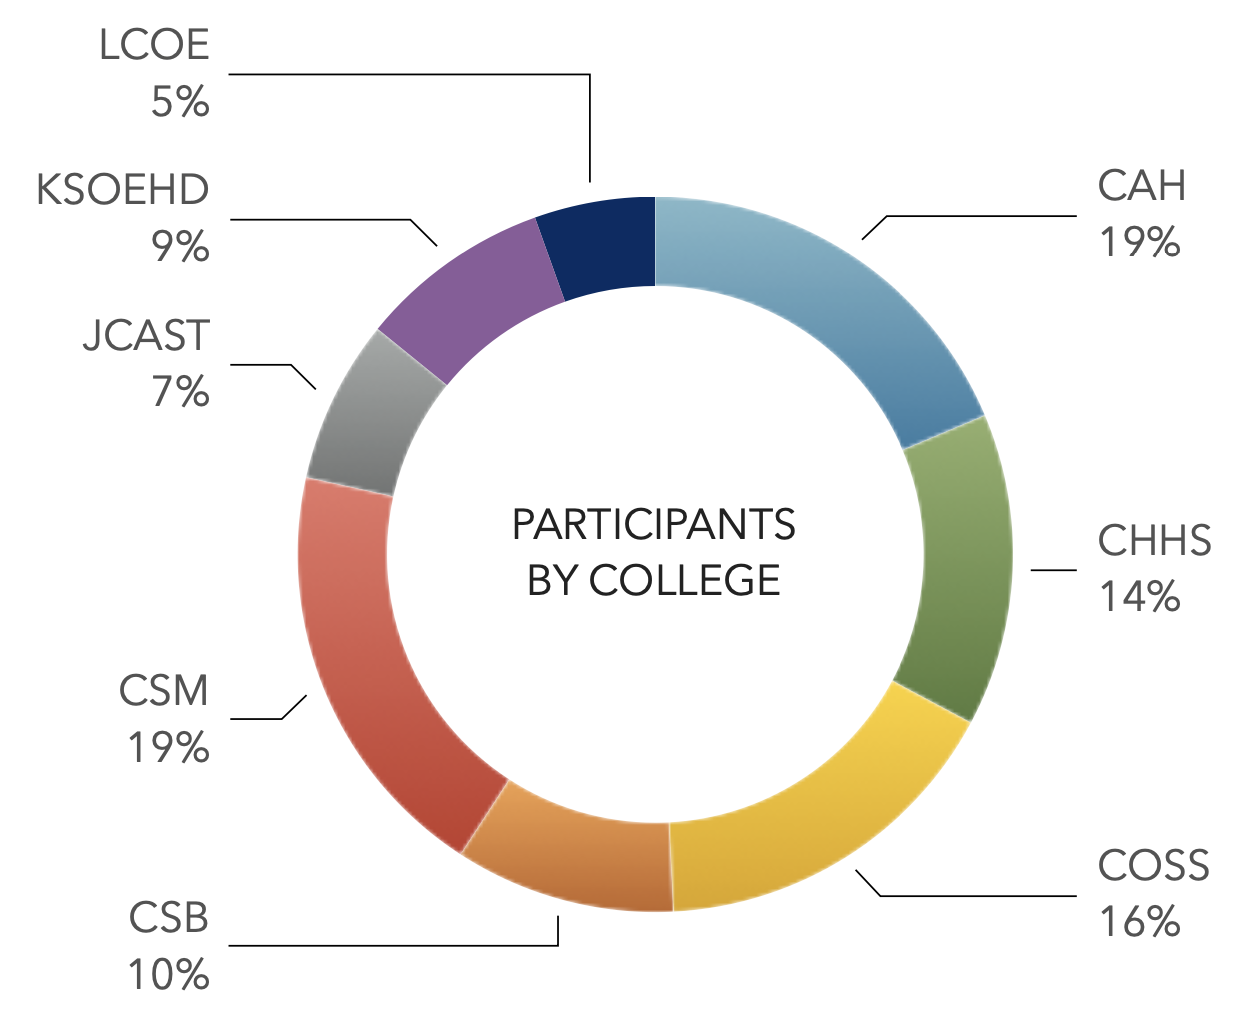 Faculty development participation by college - full data in table below